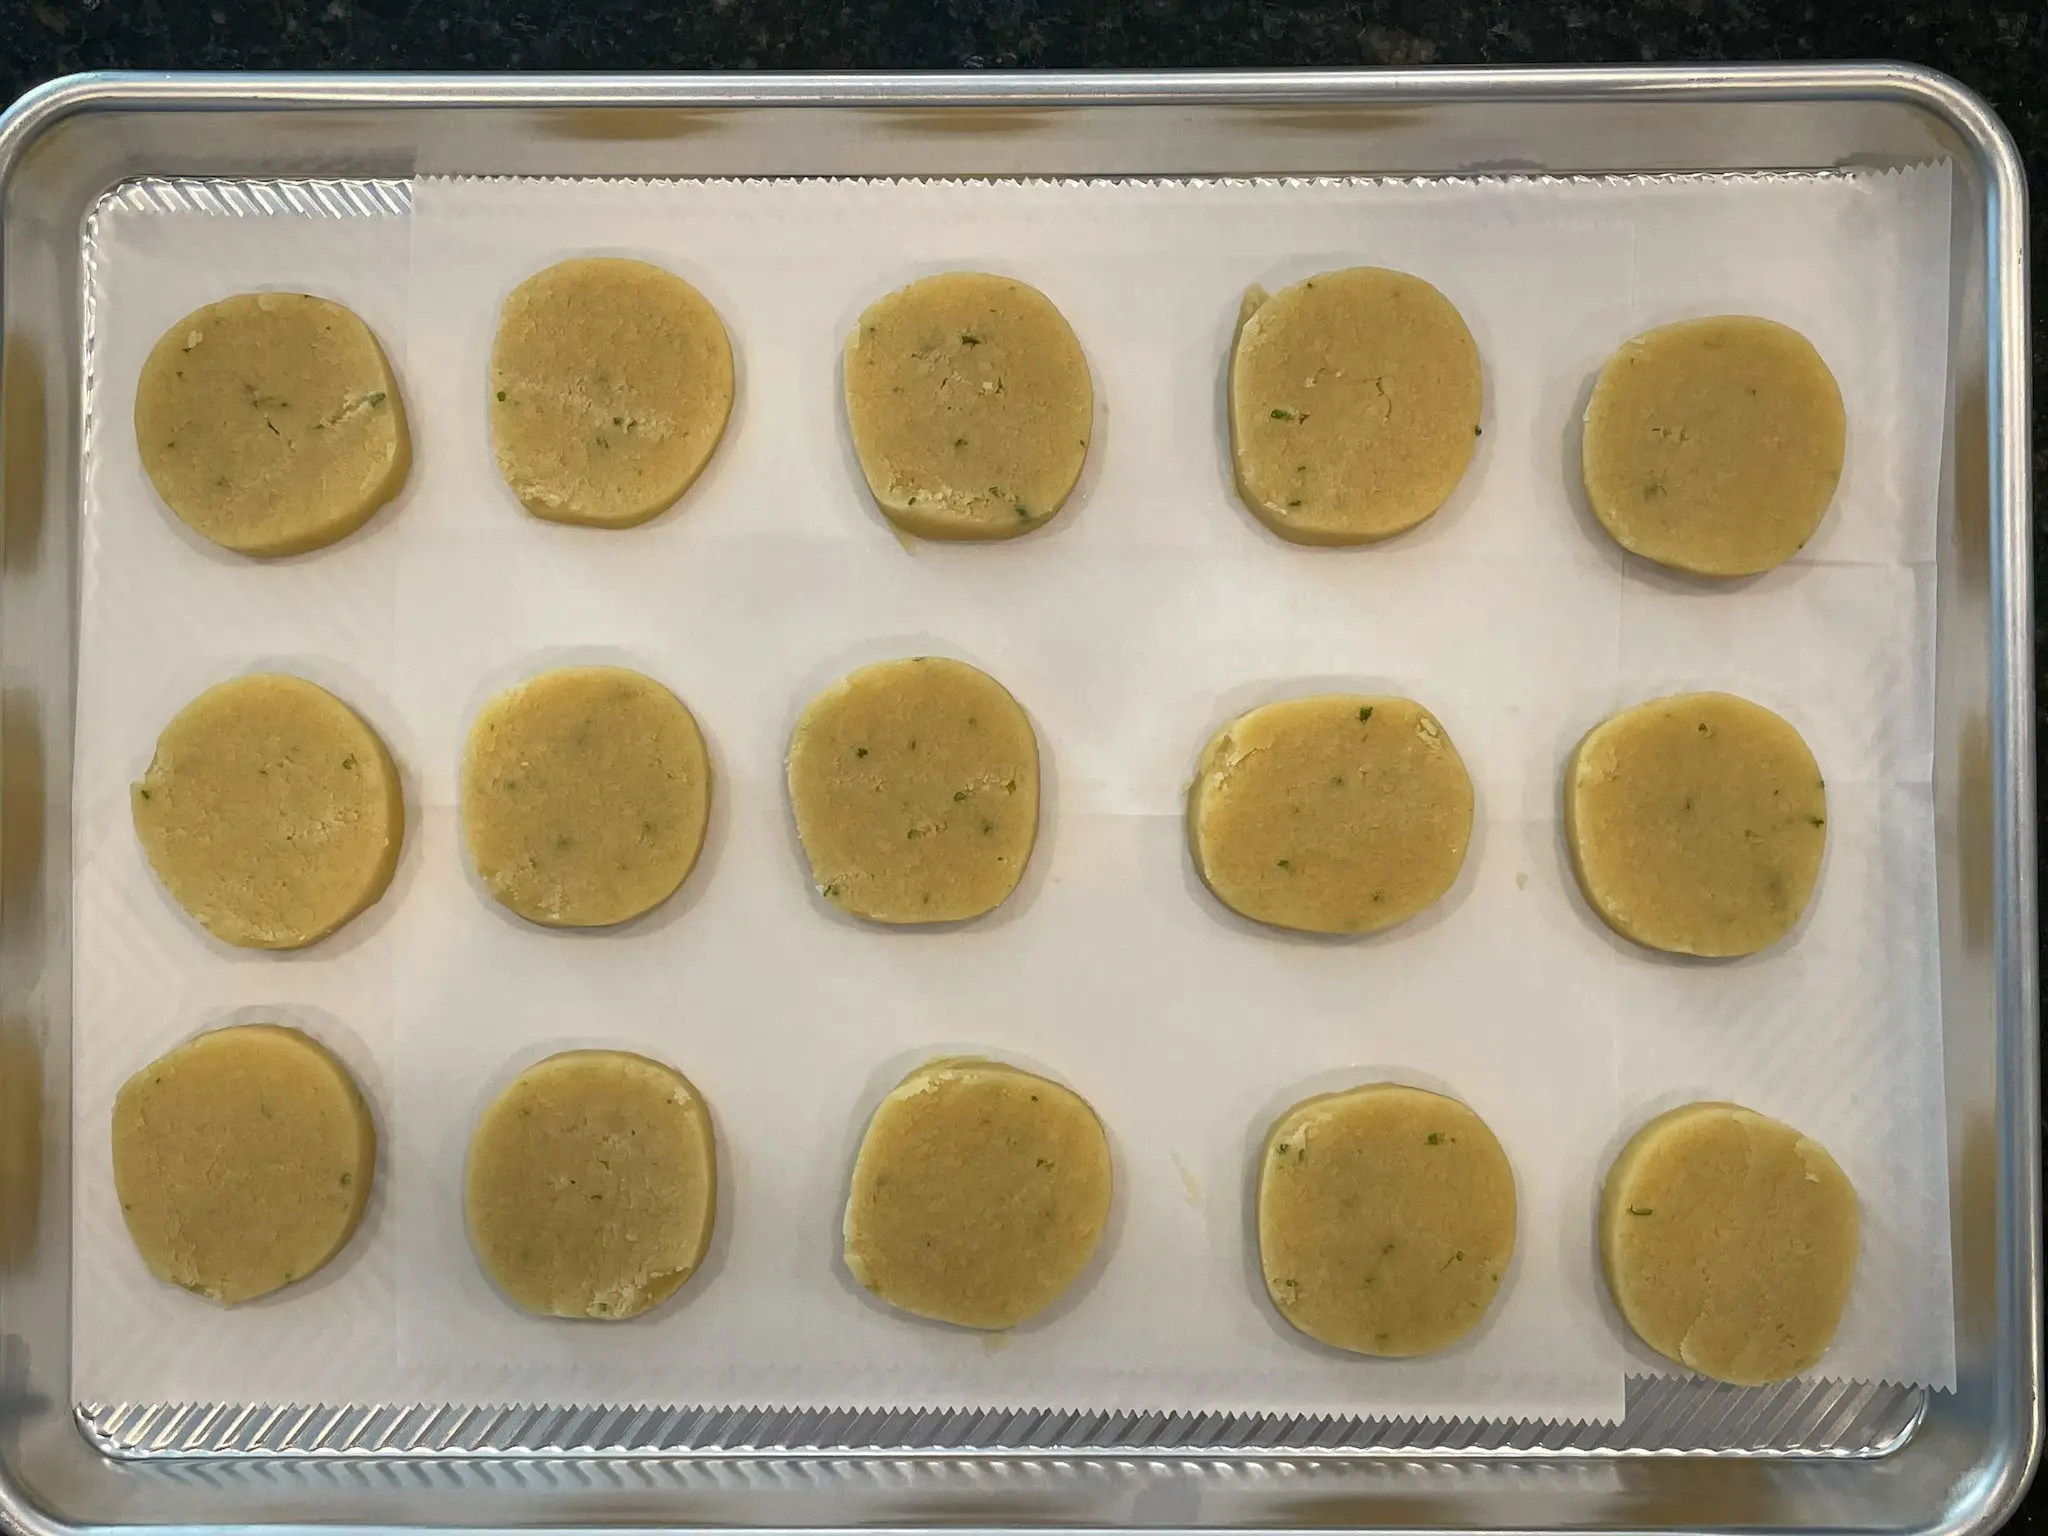 Uncooked torticas de moron on a cookie sheet.